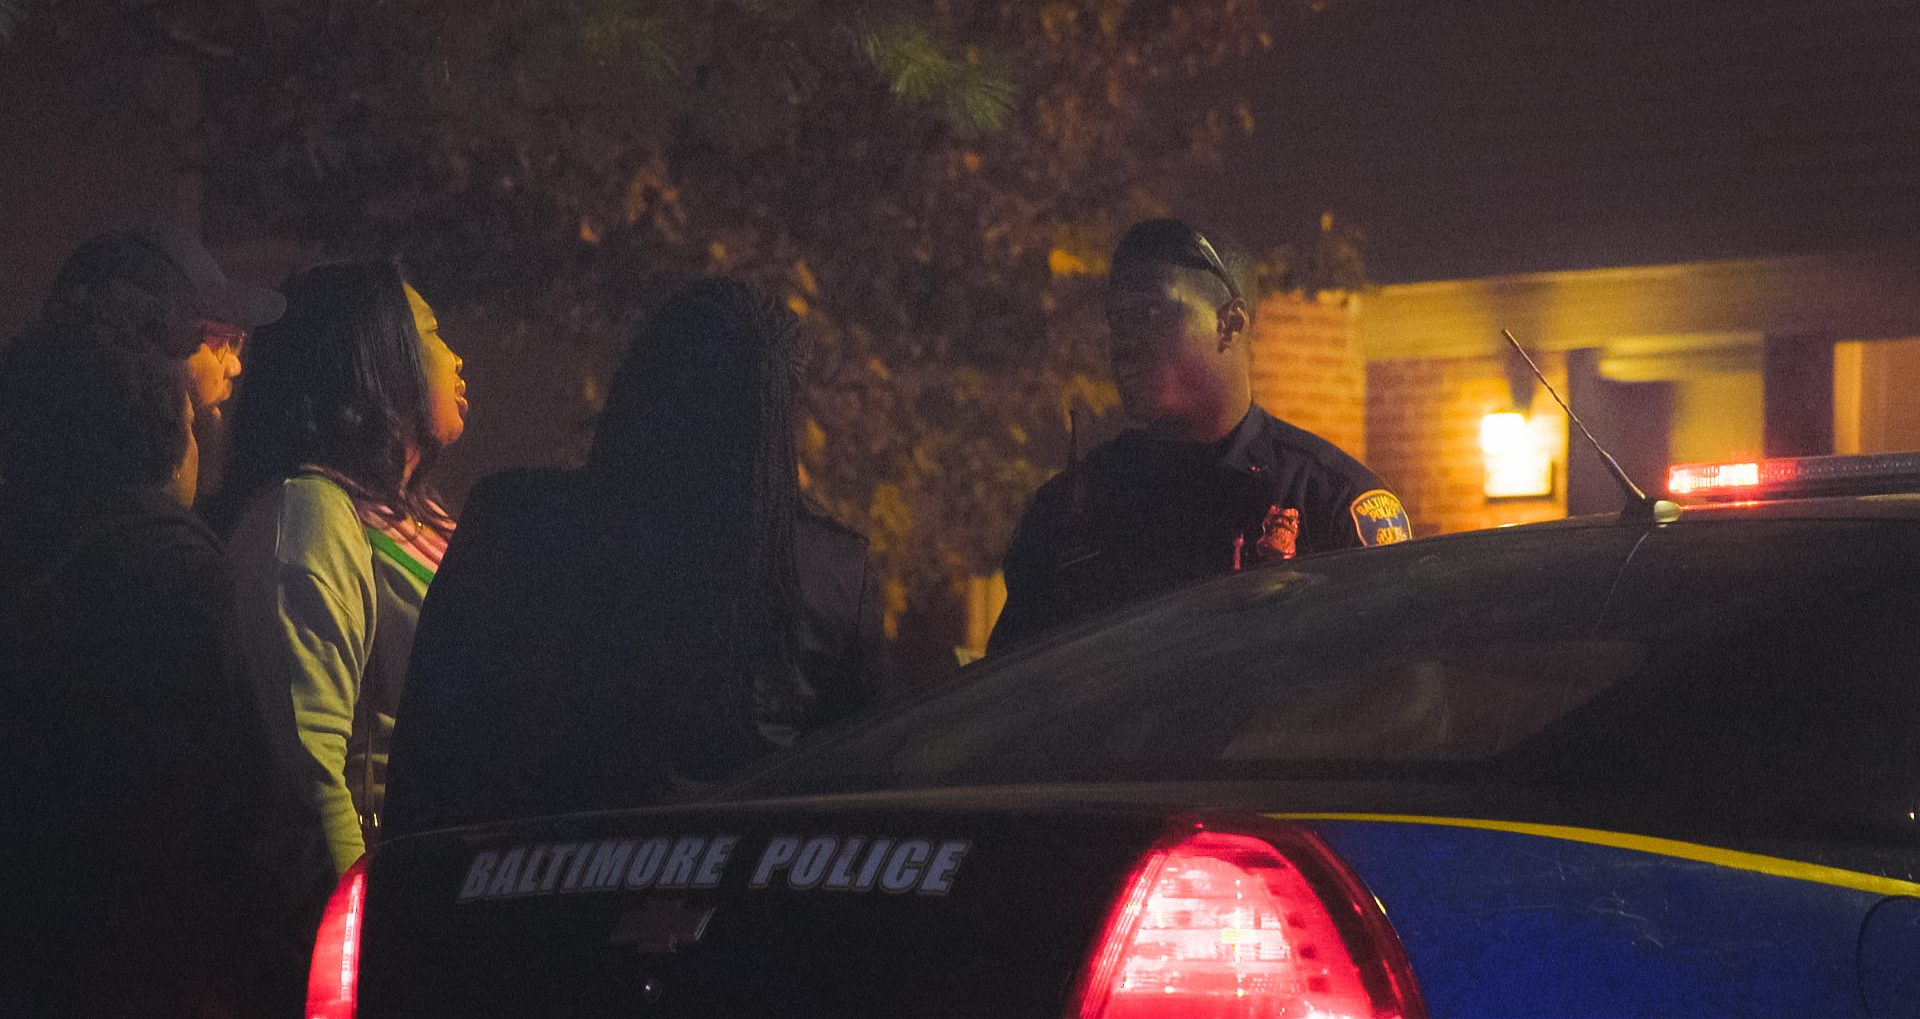 Community members speak to a police officers at night.